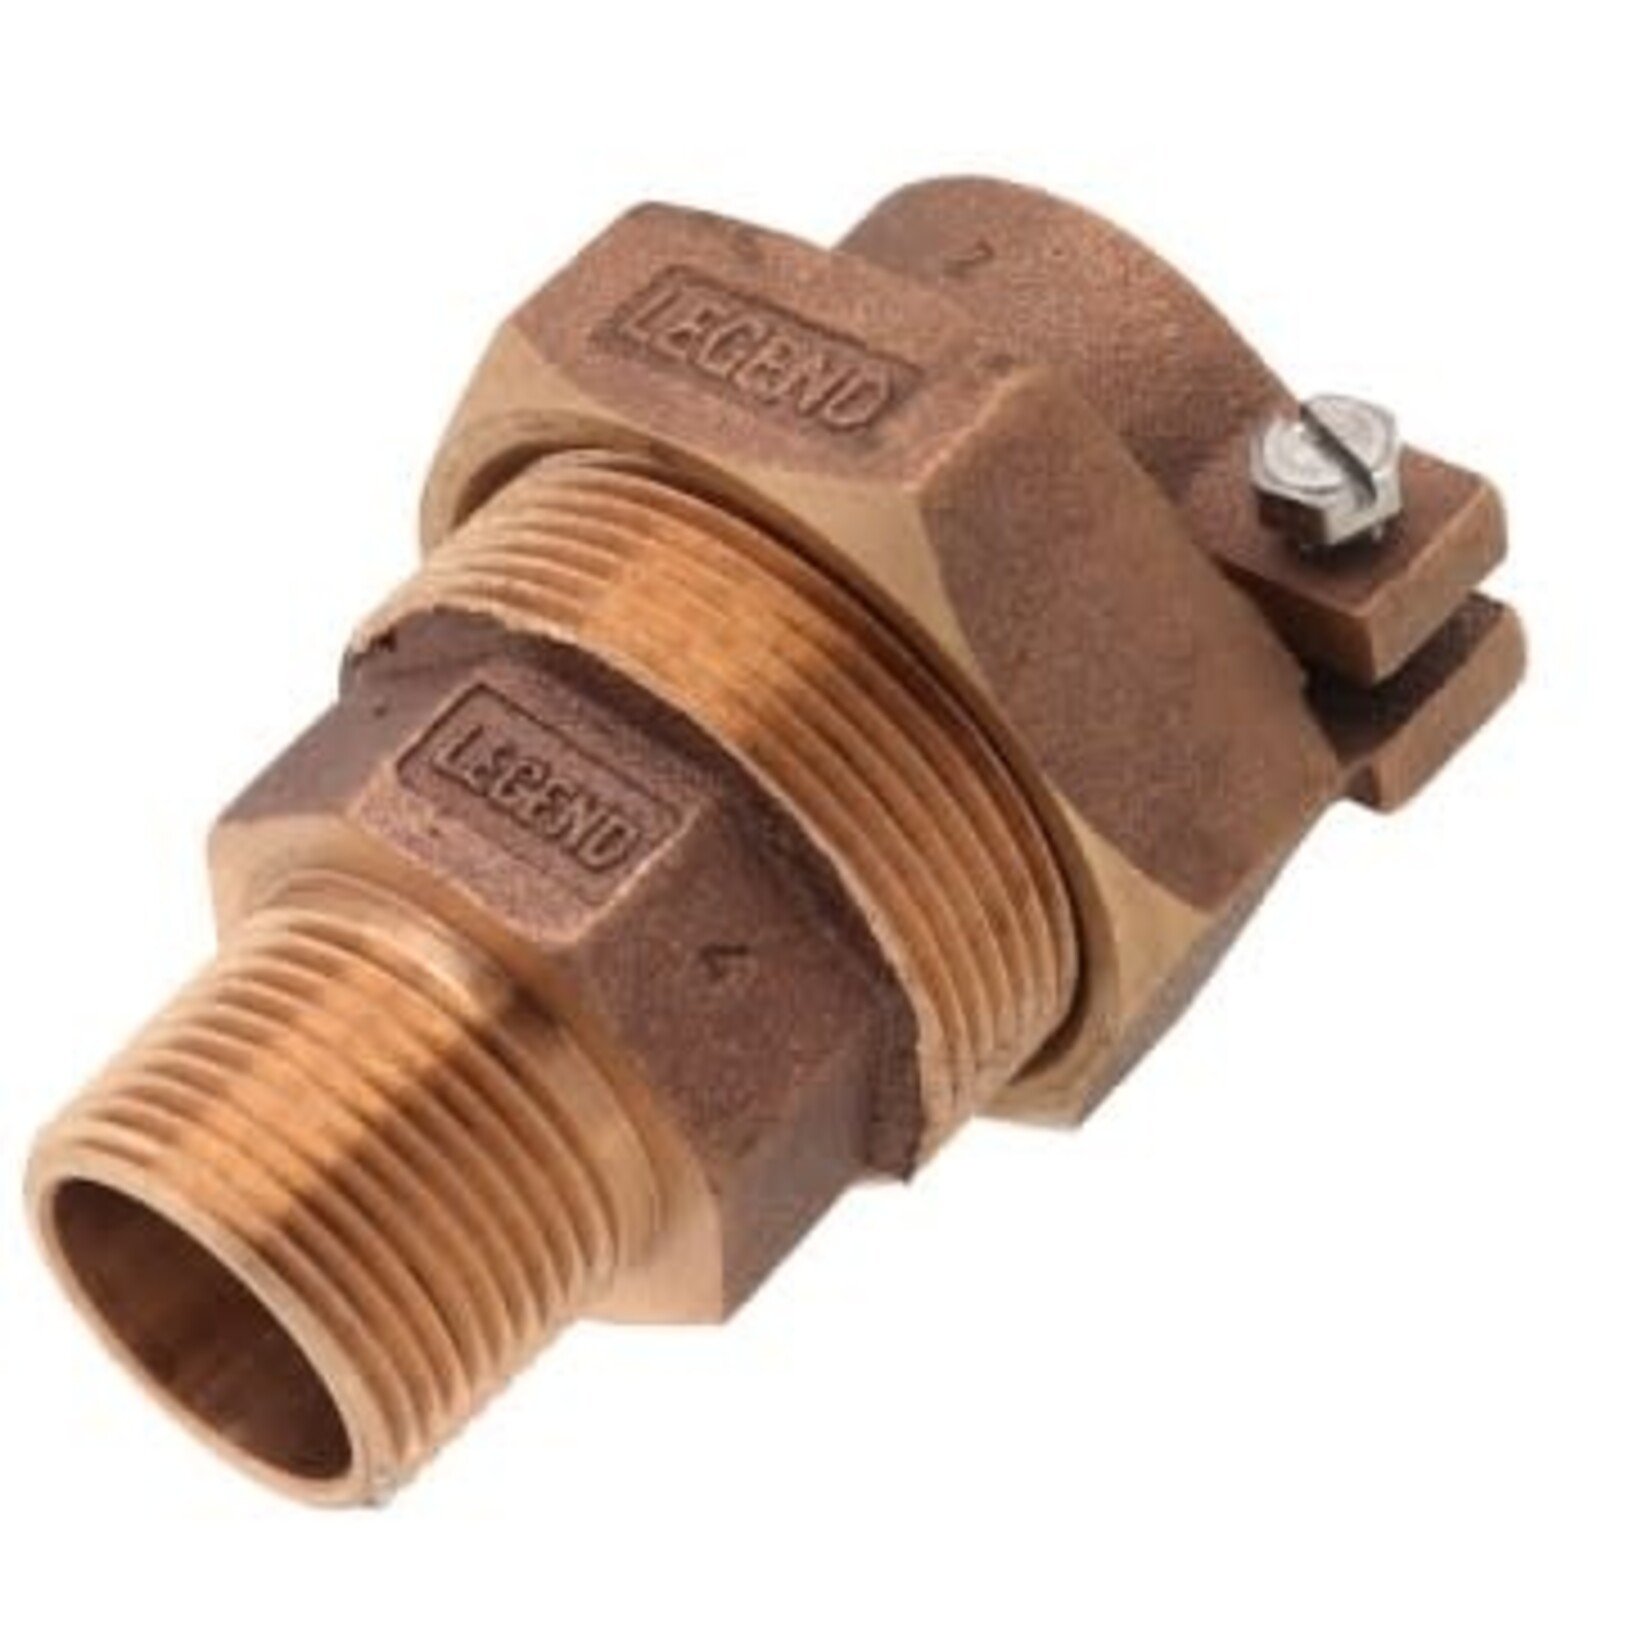 LEGEND VALVE 1 IN T-4320 BRASS PACK JOINT MALE COUPLING (MALE X IPS)